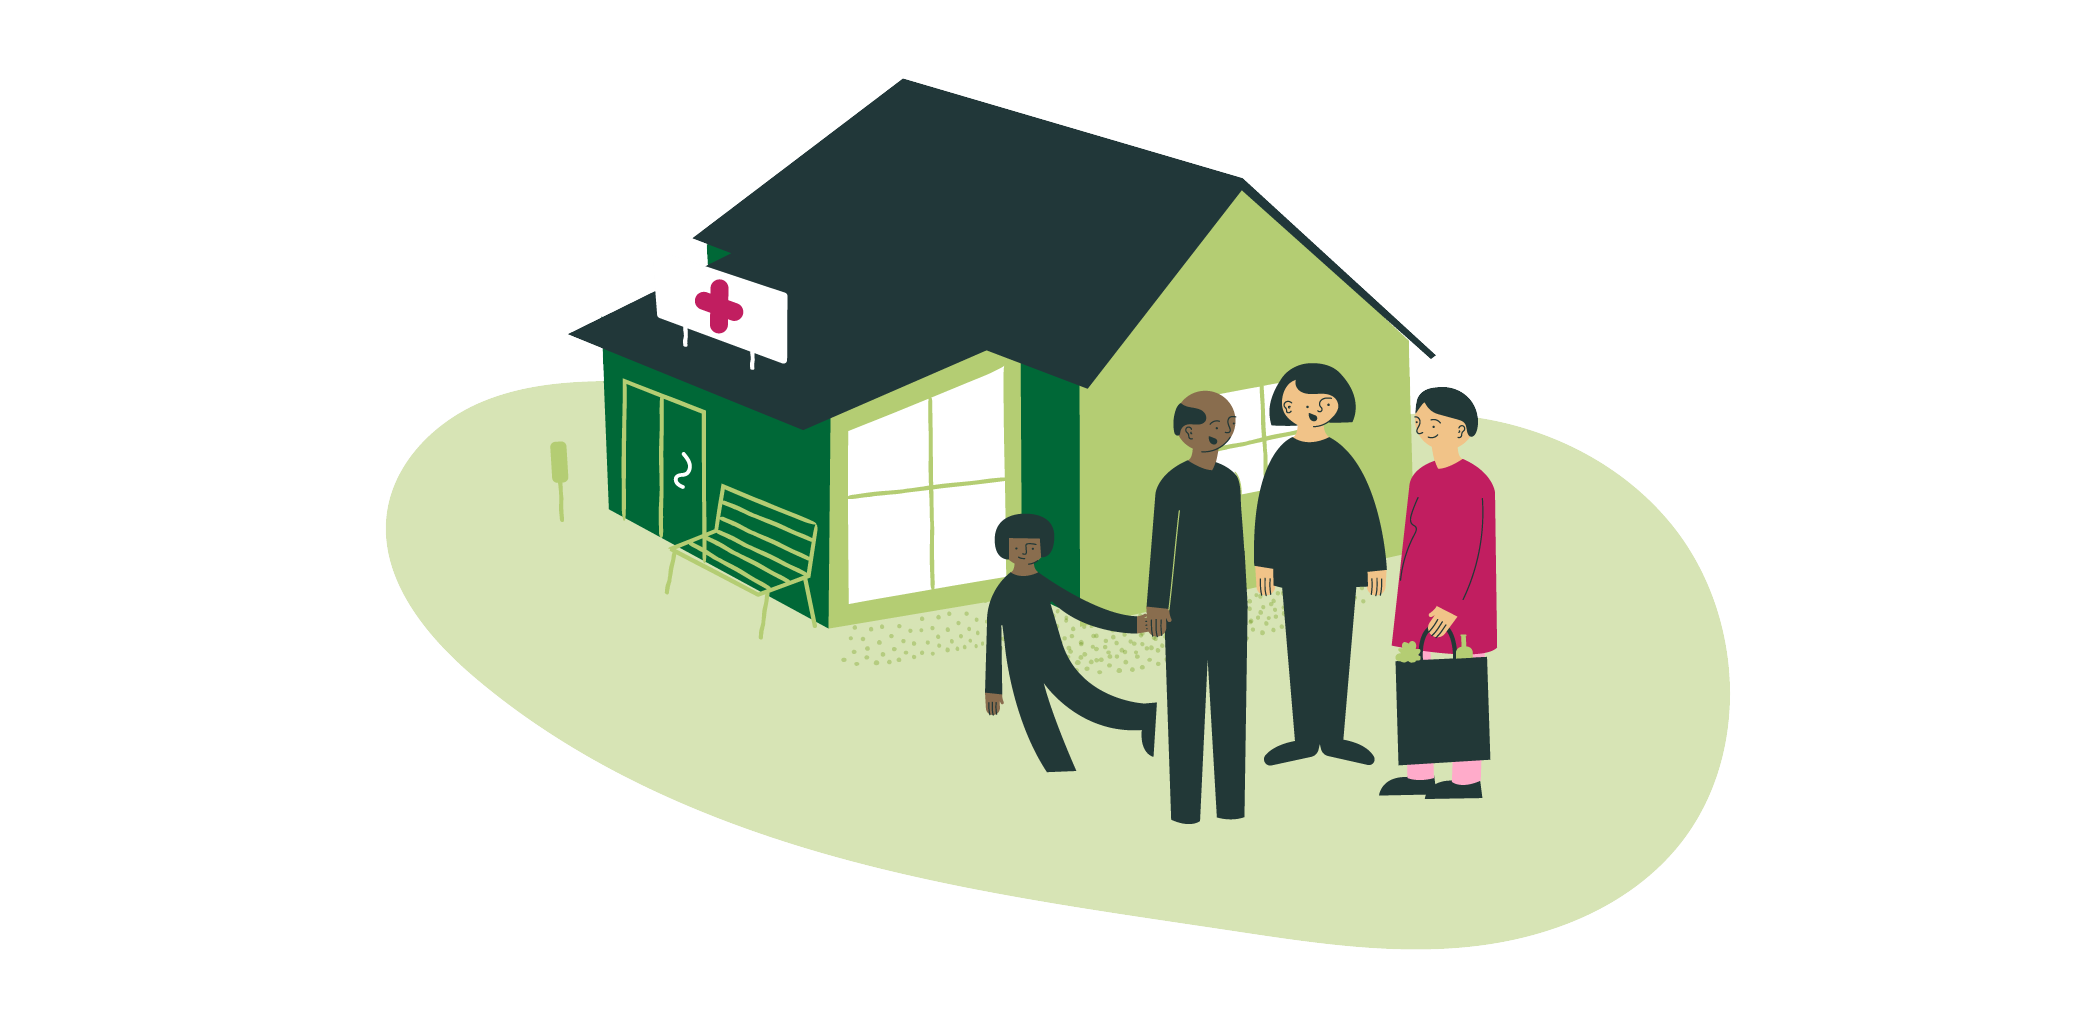 Drawing of house with a red cross and different kinds of people